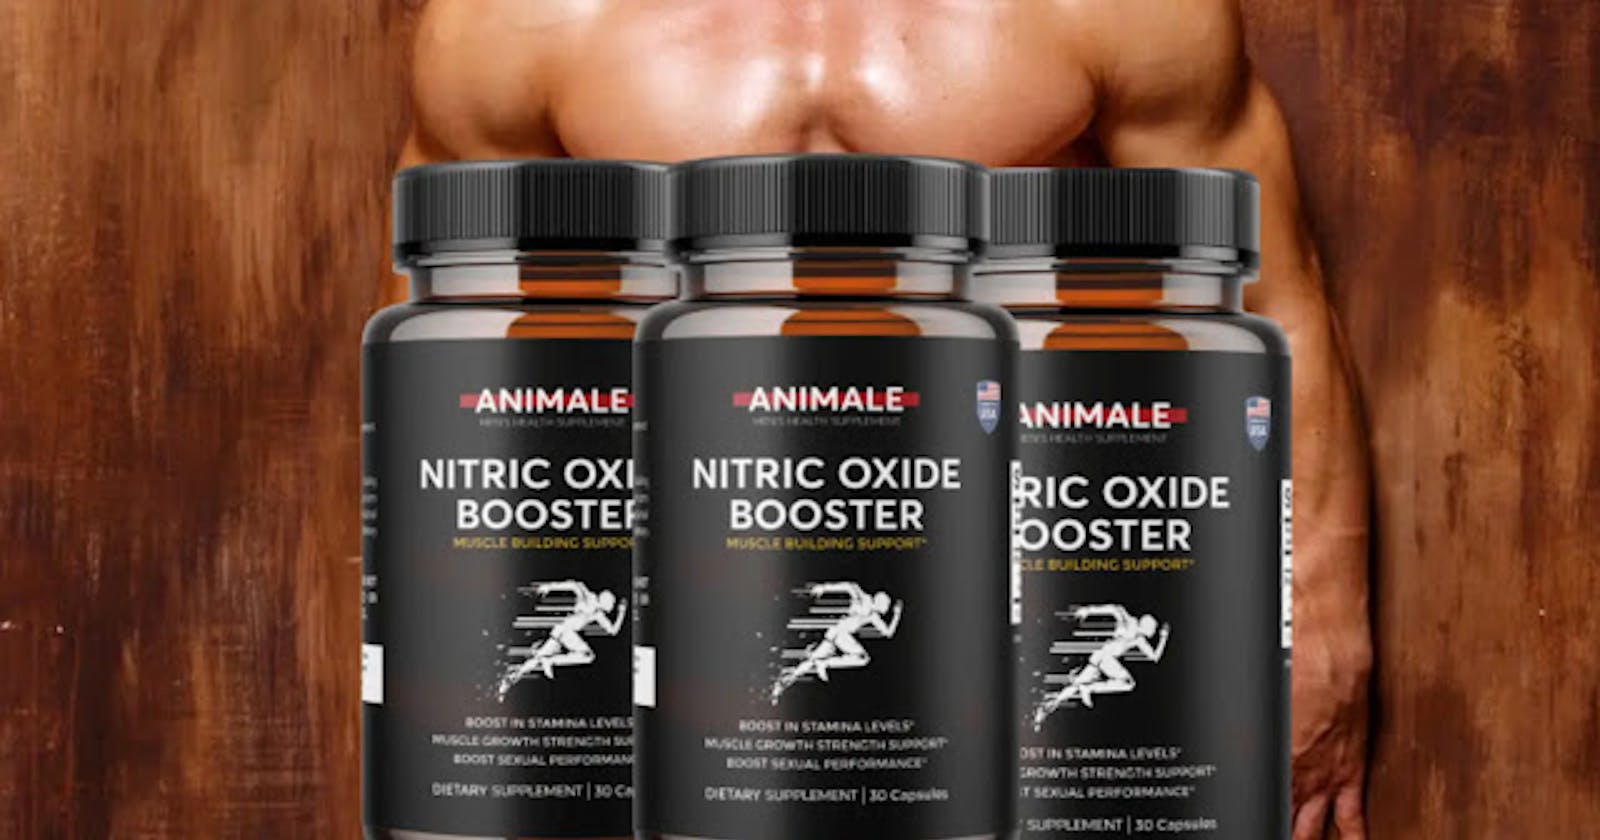 Animale Nitric Oxide Booster Reviews (USA): Is It Legitimate Or Scammer? Shocking Ingredients?